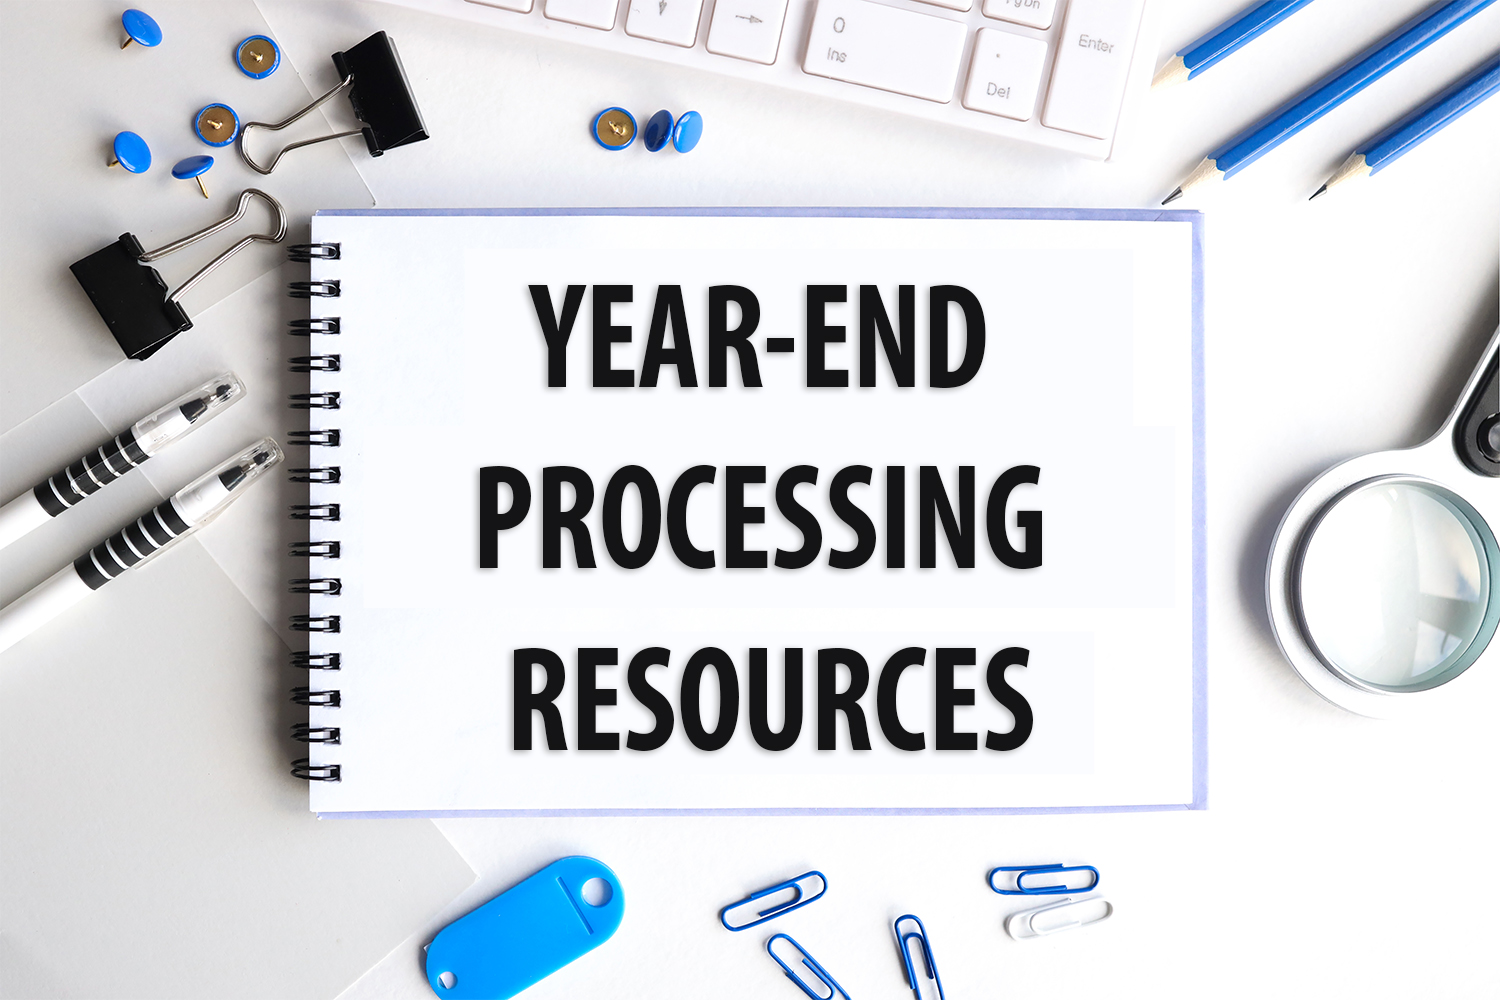 Complete Resources For Your Construction Year-End Processes: On Tap!